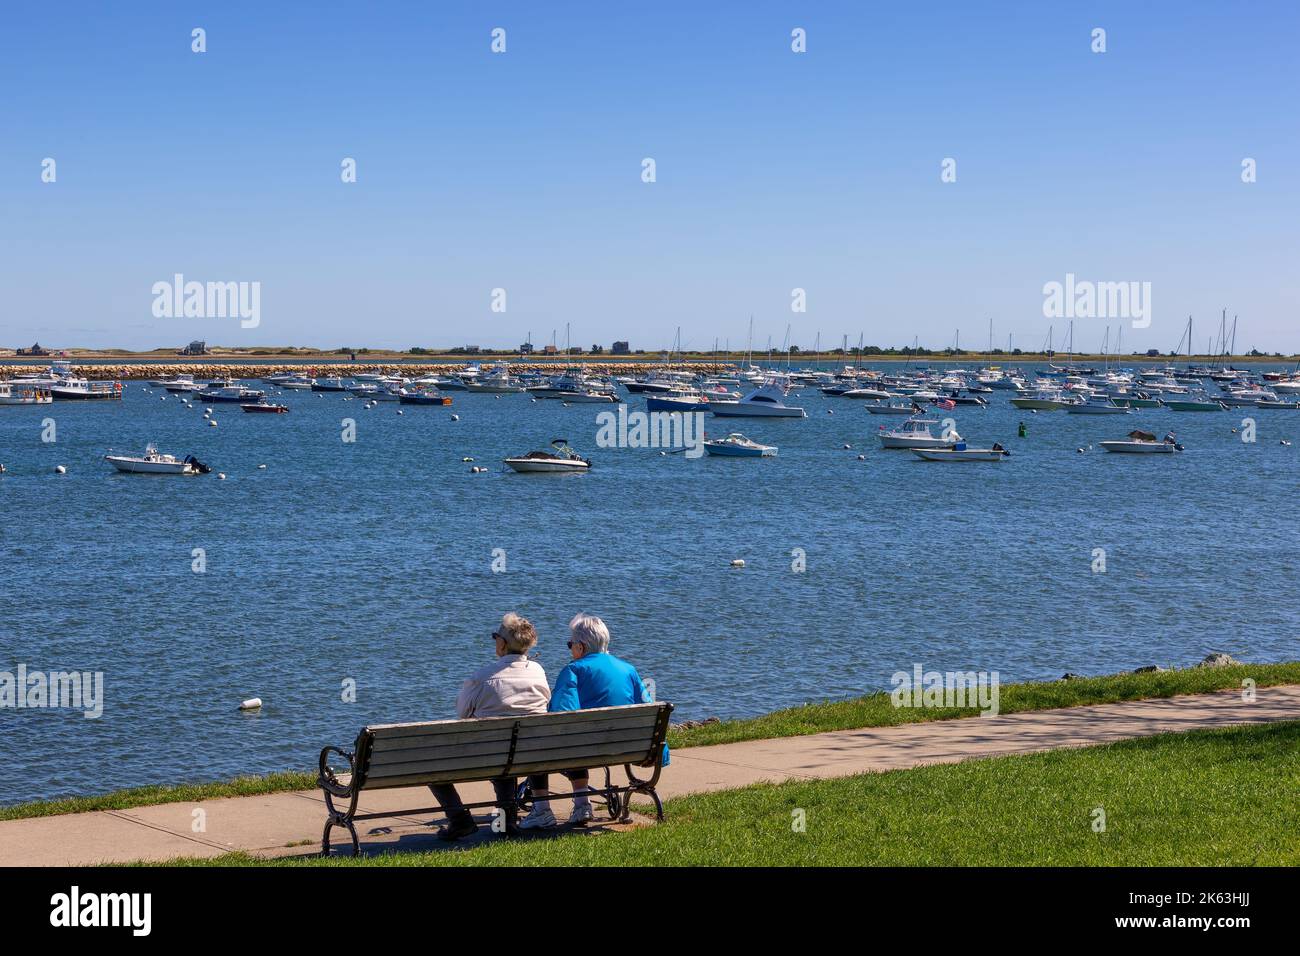 Plymouth, Massachusetts, USA - September 15, 2022: Two peope sit on a bench enjoying the view of the harbor on a sunny fall Day. Stock Photo